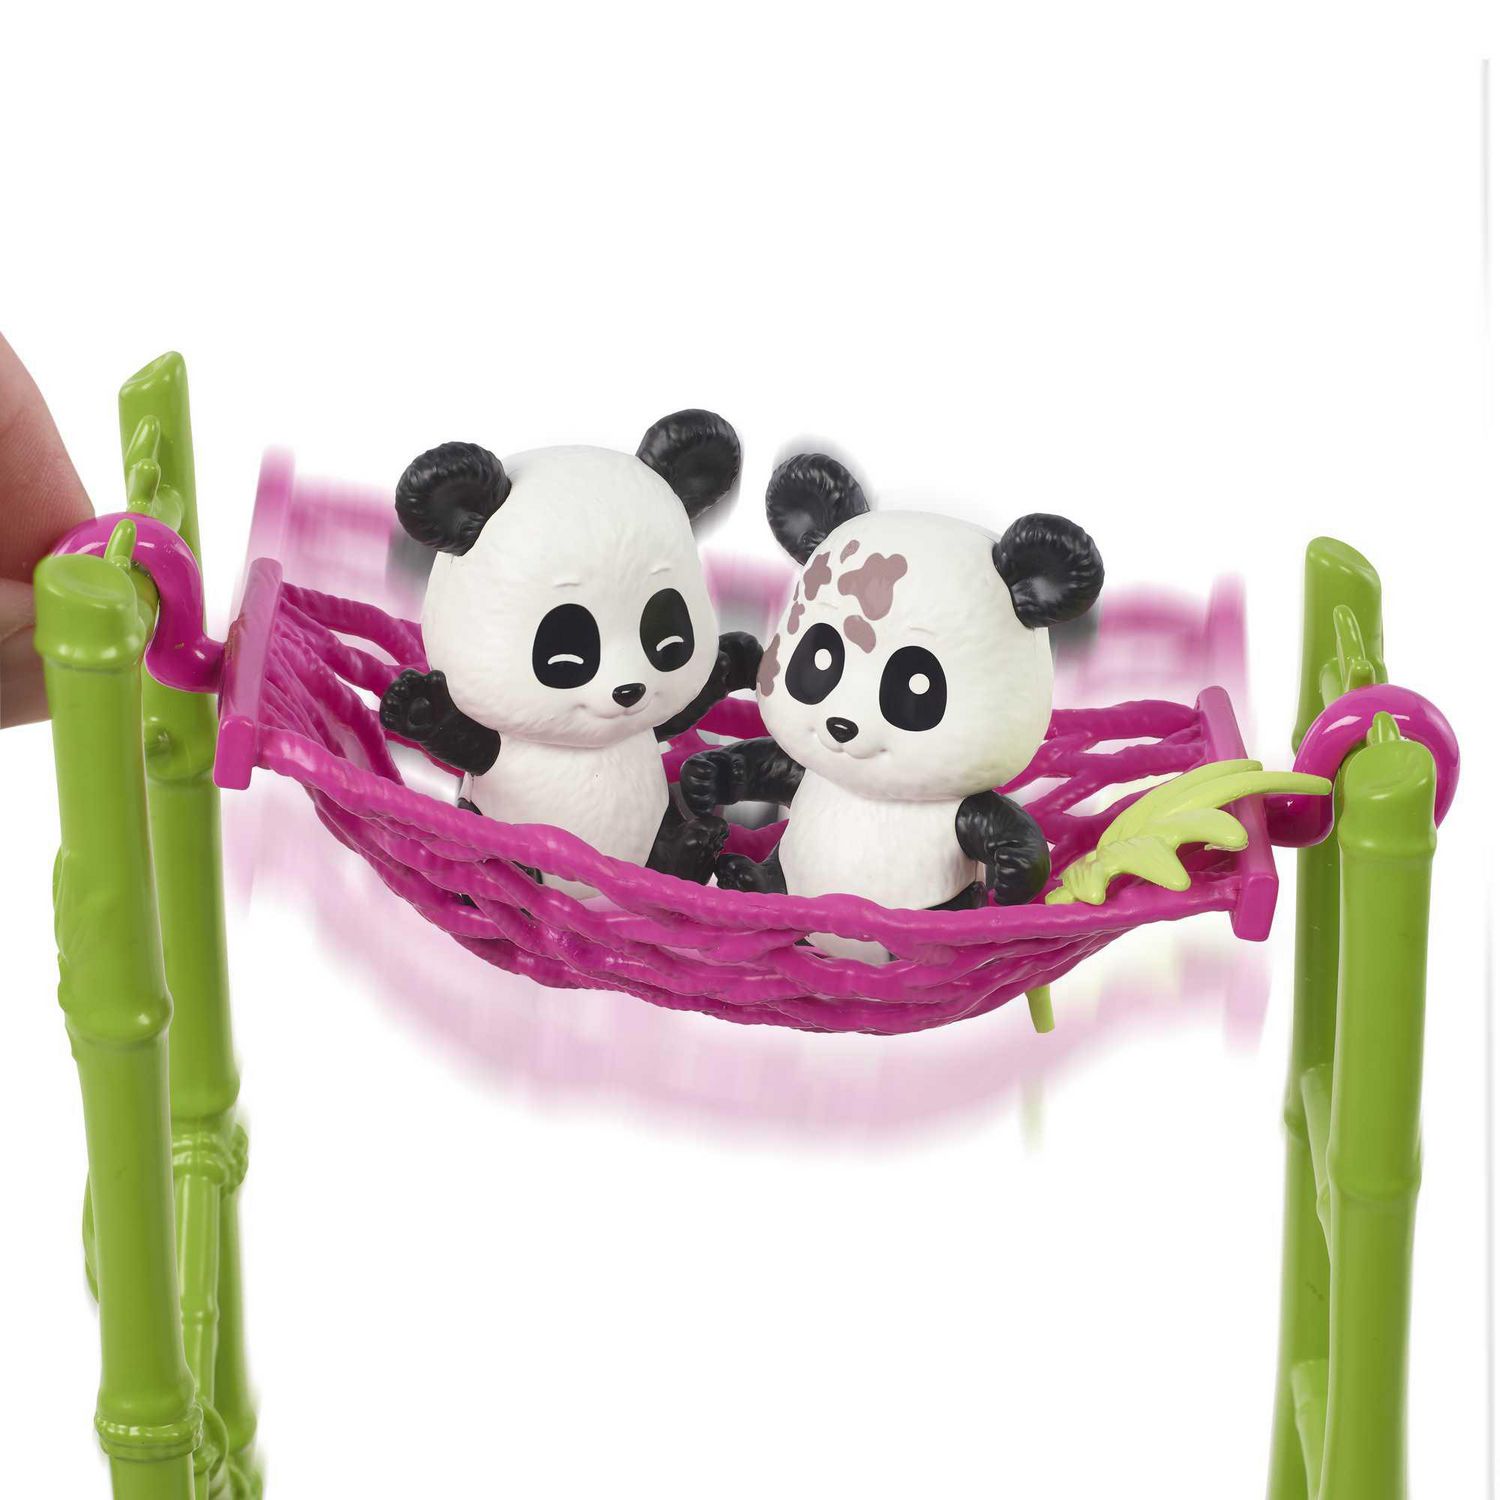 Barbie Doll and Accessories, Panda Care and Rescue Playset with  Color-Change and 20+ Pieces